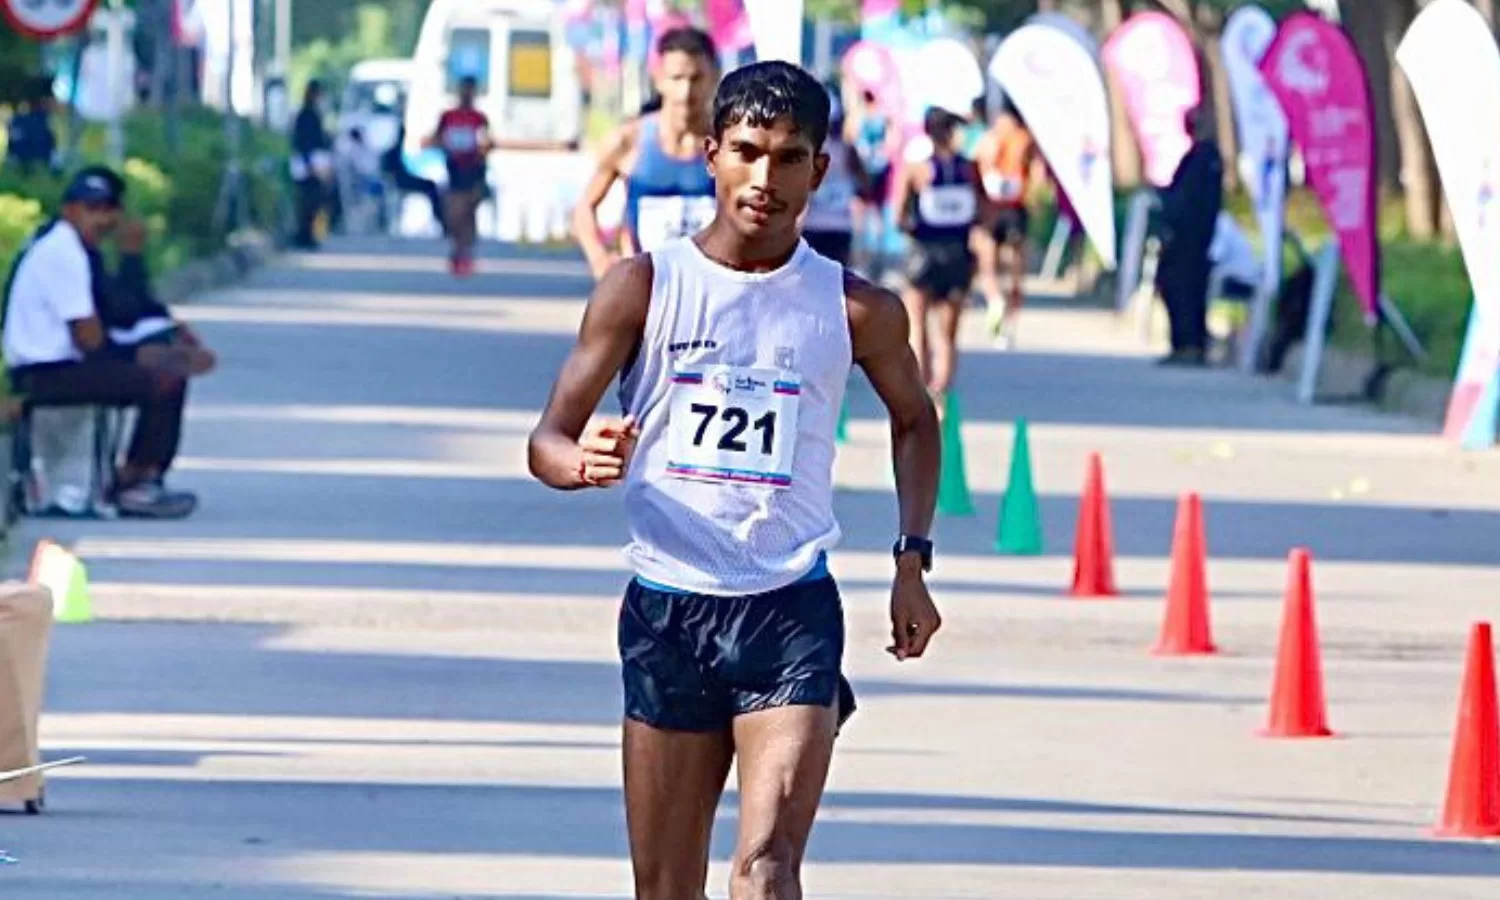 Ram Baboo overcomes 'harsh weather' to qualify for 2024 Paris Olympics